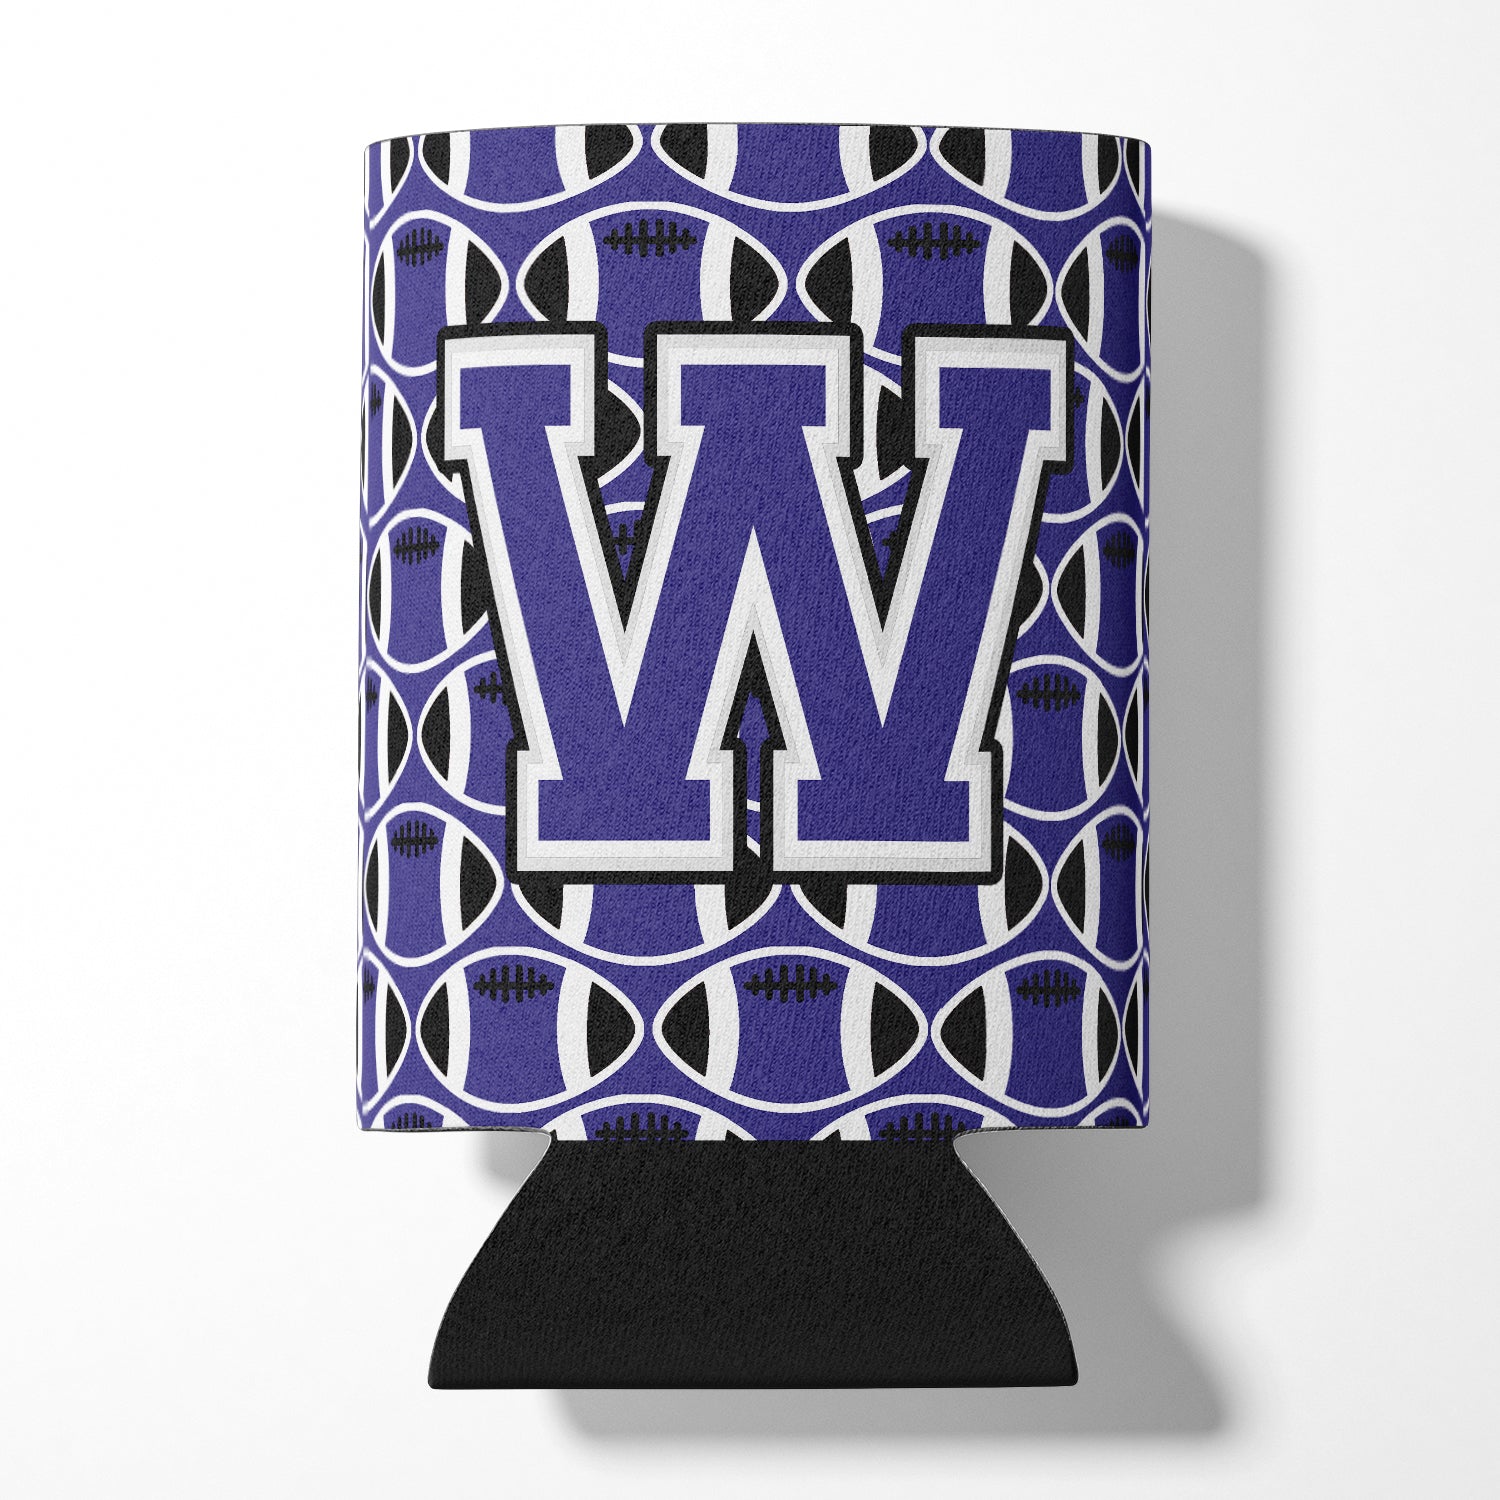 Letter W Football Purple and White Can or Bottle Hugger CJ1068-WCC.